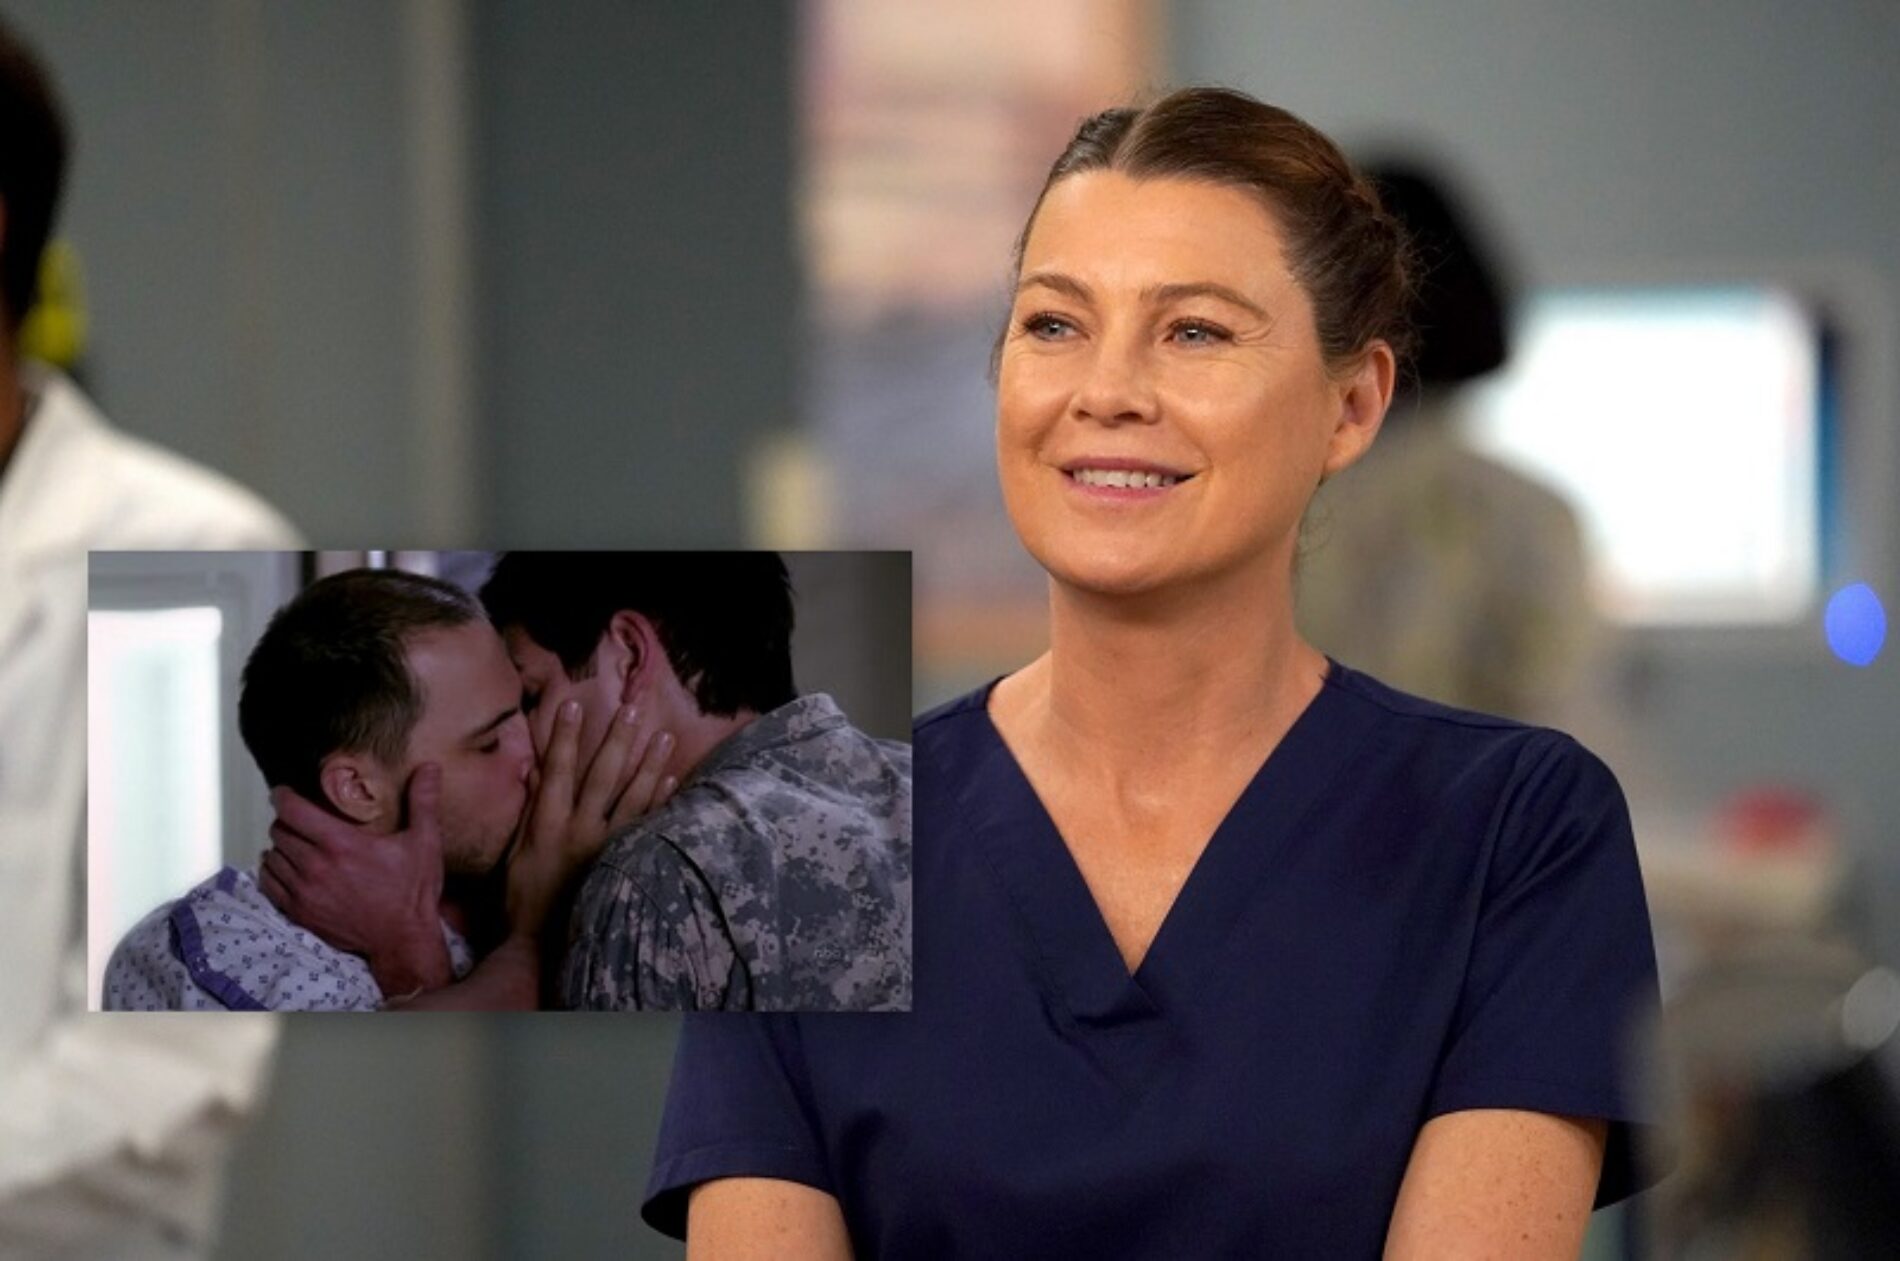 “The Show Humanizes Stories In A Way People Need To See.” Grey’s Anatomy’s Ellen Pompeo Talks About The Military Gay Kiss In The Show